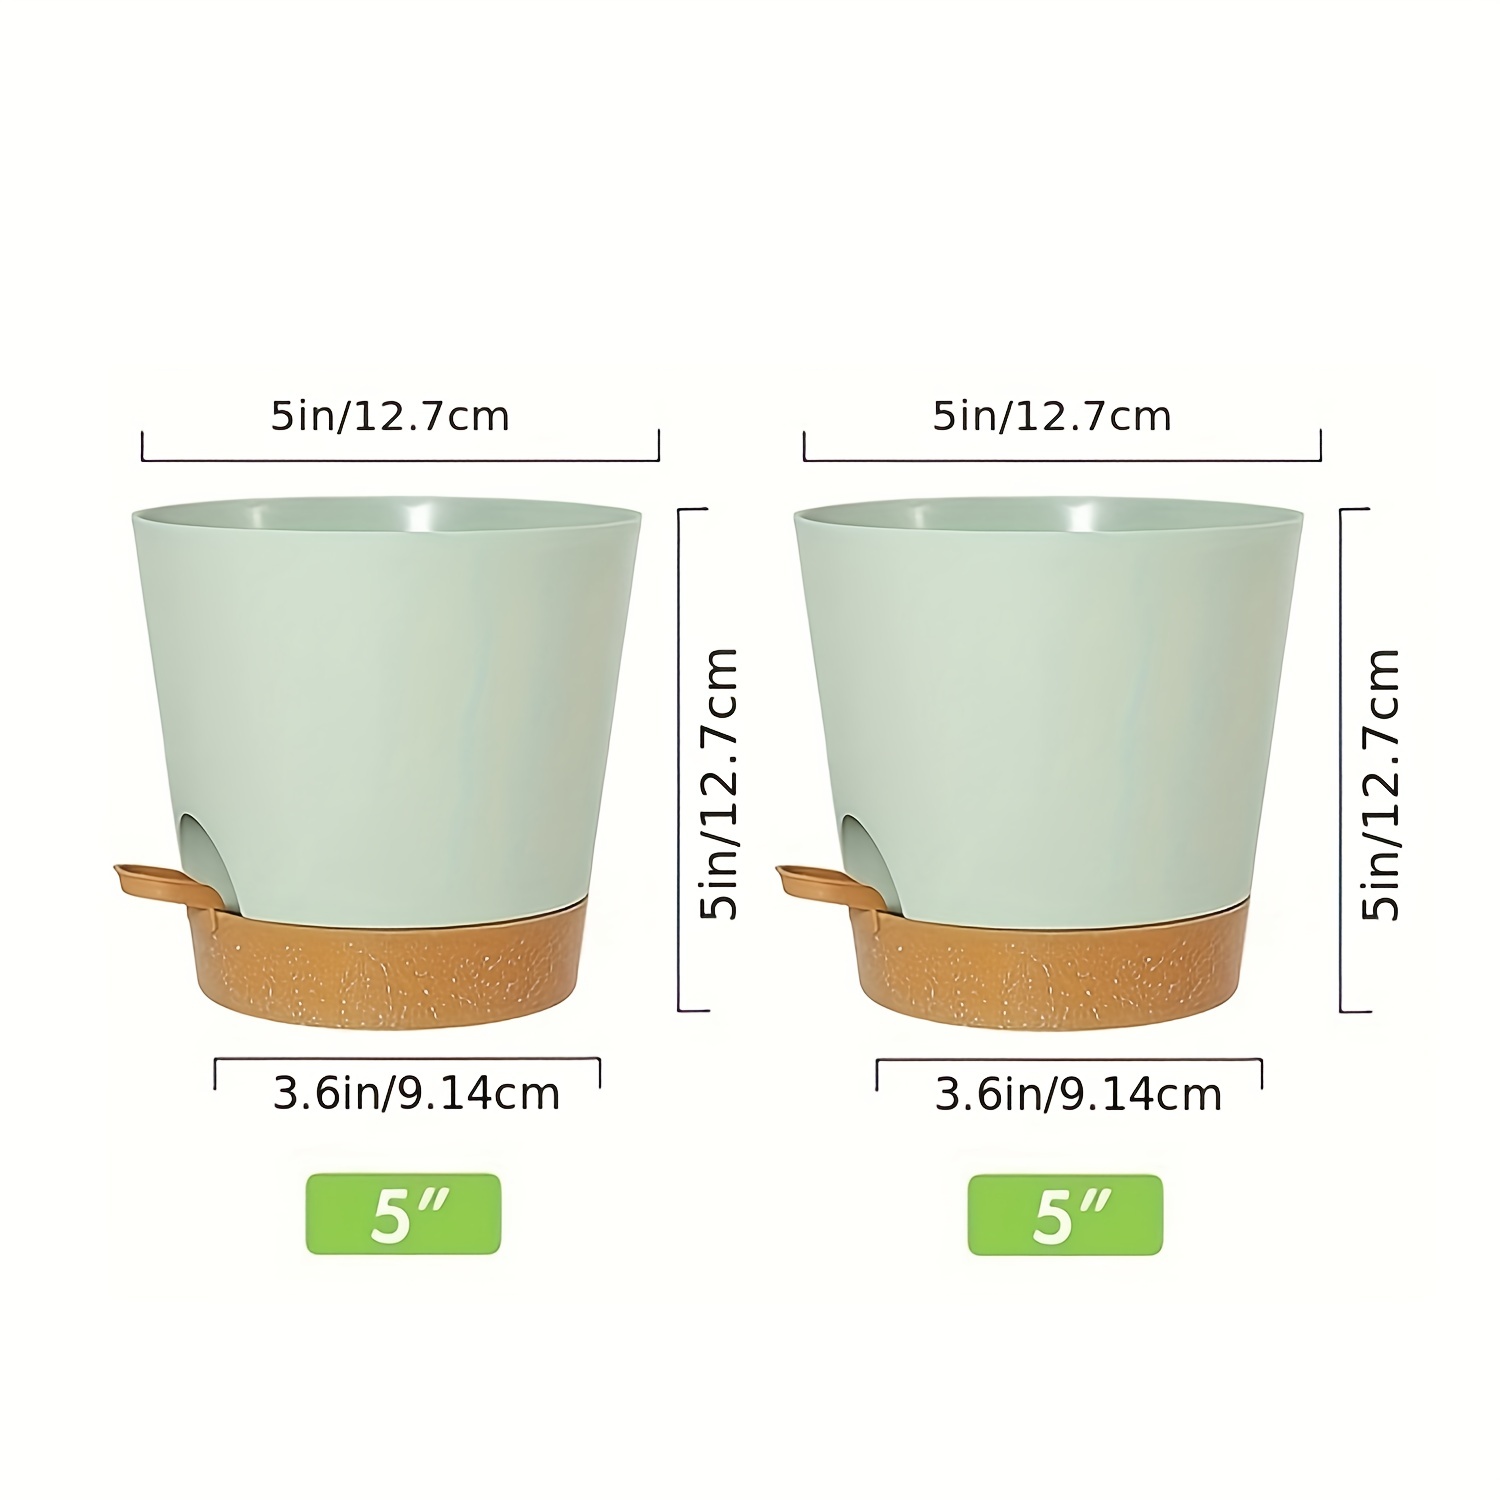 4 Pack 6 Inch Self-Watering Plant Pots - Plastic Planters with